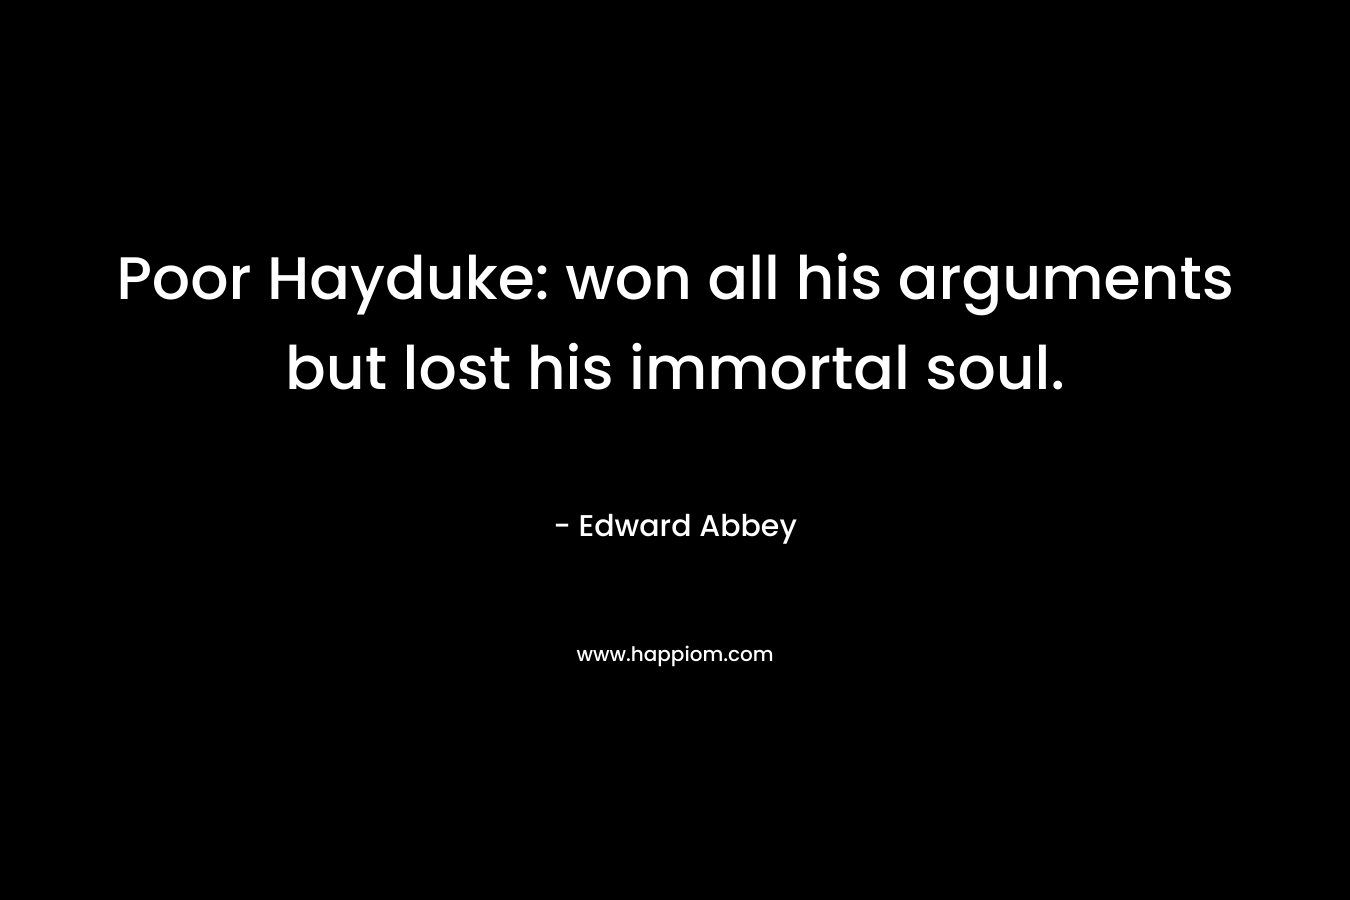 Poor Hayduke: won all his arguments but lost his immortal soul. – Edward Abbey